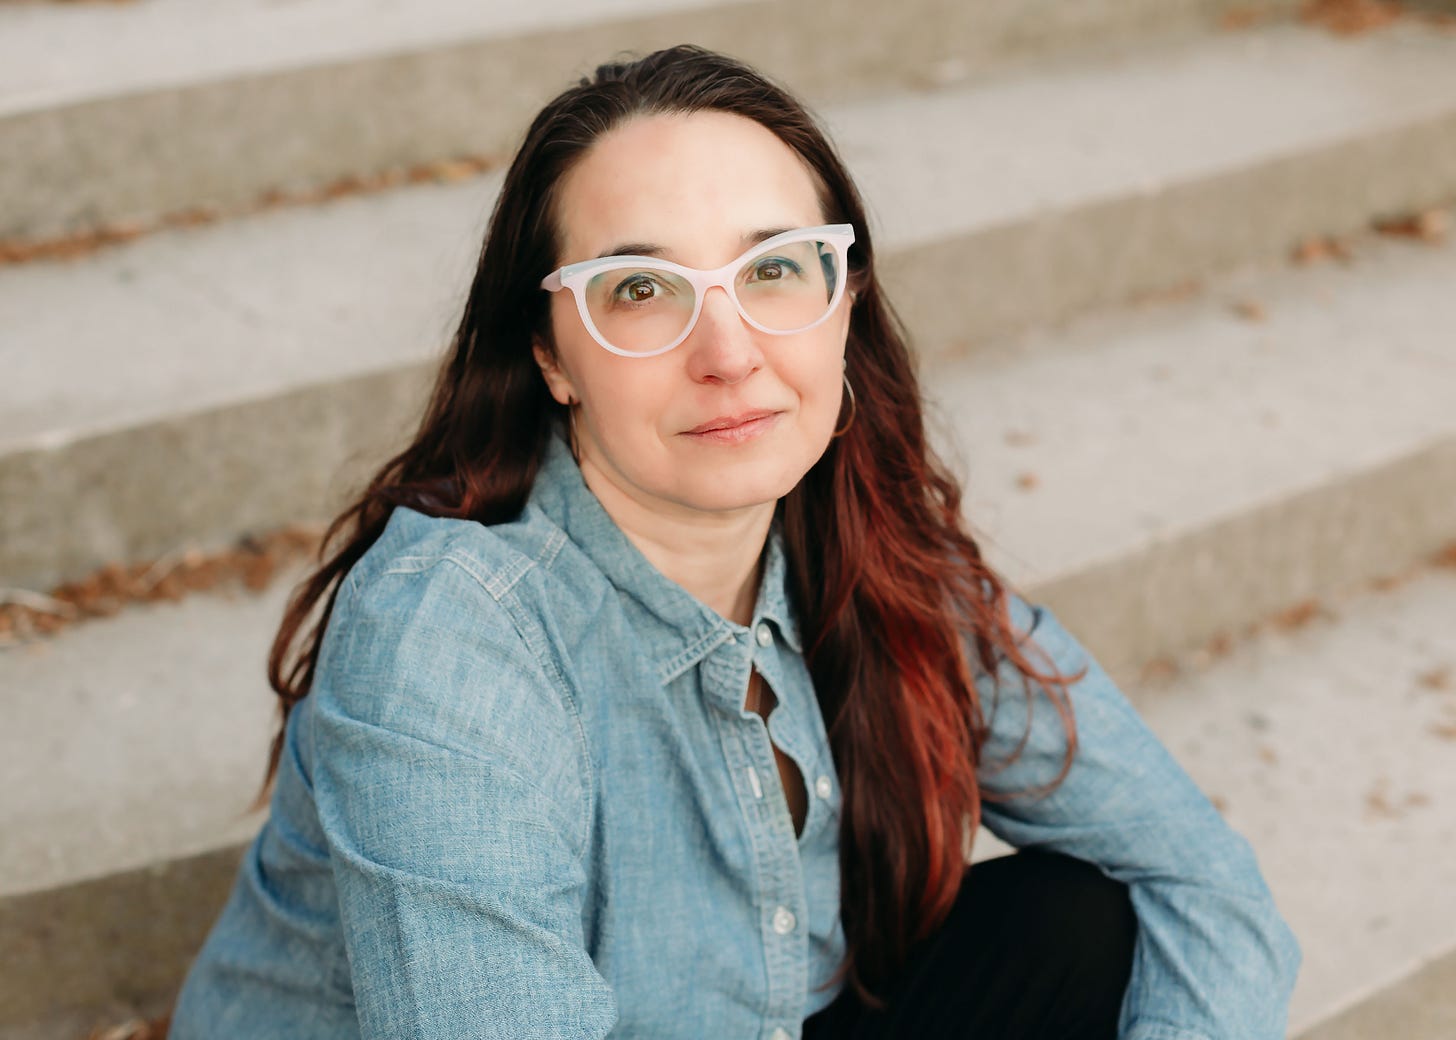 Headshot of author Sonya Huber from the waist up, wearing a denim button-up and white-rimmed glasses, sitting on concrete steps.